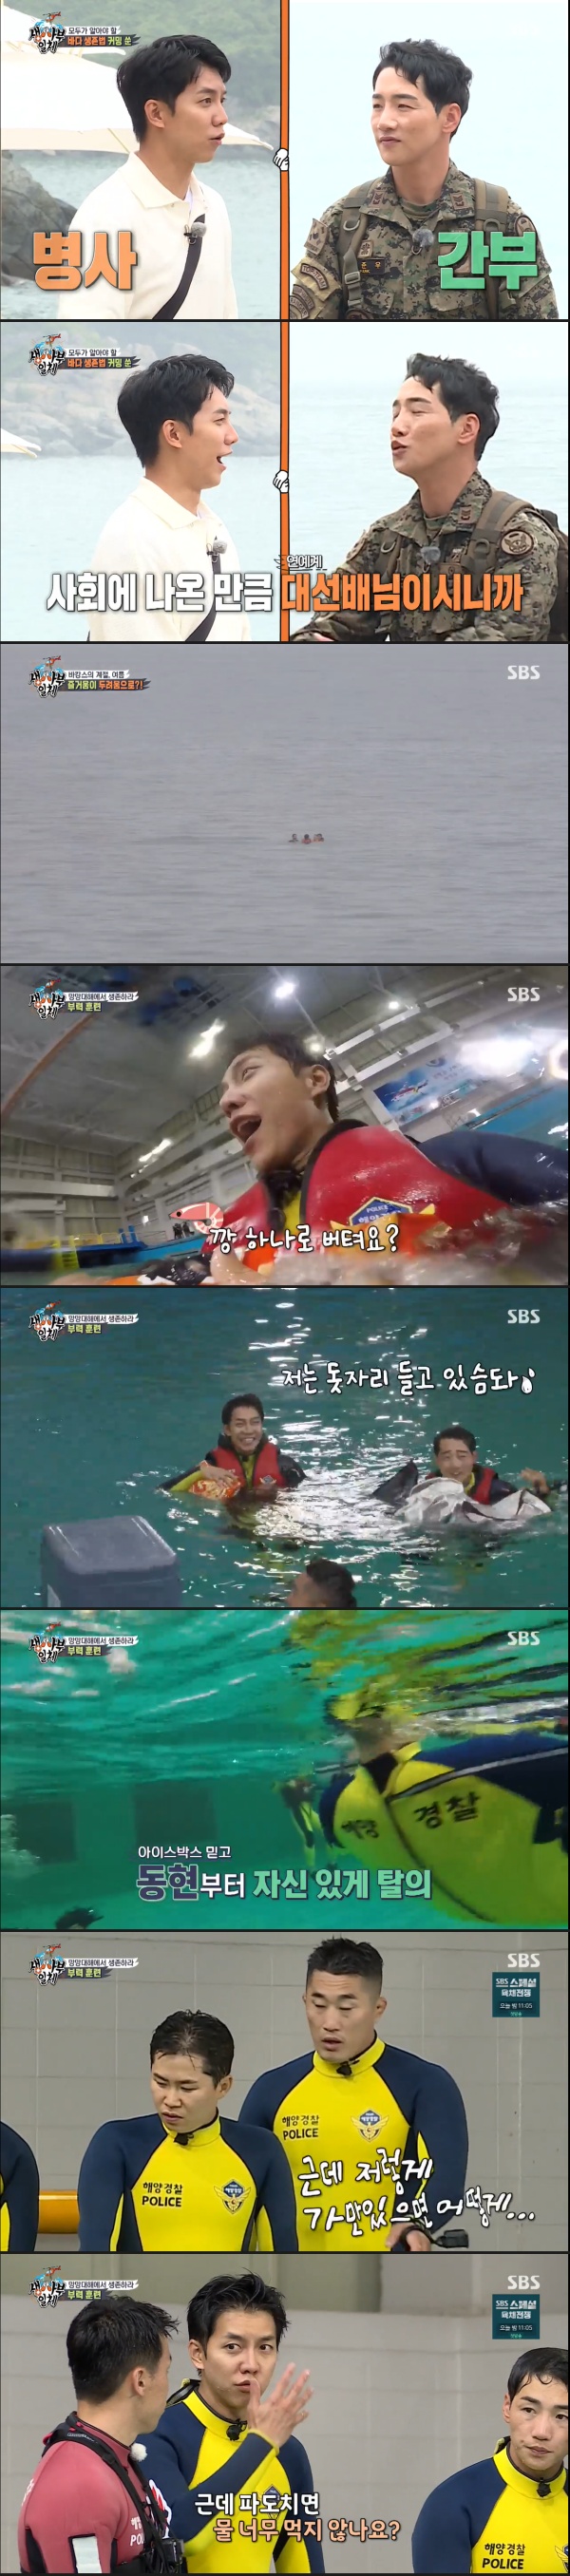 On the 27th SBS All The Butlers, Park appeared and learned about the Earth 2 method during the summer vacation season.Lee Seung-gi was pleased to see Parks appearance on the day, saying that Lee Seung-gi and Park had a relationship with each other while working in the same special forces unit.It was really amazing because the officer I saw in the military was loved by the whole people, Lee Seung-gi said.Yang Se-hyeong and Kim Dong-Hyun asked Park whether Lee Seung-gis military midsenses were true.Lee Seung-gi was a model warrior, Park said. I ran a 10km marathon at the brigade combat power contest.I was in the top 10% among the players, he said, surprising all The Butlers members.Park said, It was the first time Lee Seung-gi was the first person who had received all the training while working as a special warrior.Edit all this, Yang Se-hyeong said with a disappointed look.Lee Seung-gi, Kim Dong-Hyun, Yang Se-hyeong, and Park practiced falling into the water while riding a banana boat.But in the process, Kim Dong-Hyuns pants and Panti were stripped off; Kim Dong-Hyun shouted, Just a minute Im Panti stripped.Yang Se-hyeong said, Im peeling off my pants now. Ill cover it right away. Yang Se-hyeong said, But why do not you come to help the crew?Yang Se-hyeong, who was safely brought to the land by the marine rescue team, said, Please edit my camera. Lee Seung-gi also added that the pants are peeled off like some banana peeling off. Park also added, Kim Dong-Hyun pants are orange, and yellow inside.The more they peeled, the lighter the color. At the end, I saw flesh color. On the other hand, Yang Se-hyeong also spoke of the late period of inoculation of Janssen Pharmaceuticals, a corona 19 Vacine.I came yesterday with Janssen Pharmaceuticals Vacine, I woke up sleeping and I was sweating, Yang Se-hyeong said.Lee Seung-gi said, I did not shed that much, so I will lose weight. He also talked about MSG.Yang Se-hyeong then said: Really, there are some things that are twisted - I got an eyebrow tattoo yesterday.Now the eyebrows are shiny, its waterproof creamed, he said, laughing at the members, who asked: Is it red, not black?This becomes natural after a week, but what do you care so much about? Yang Se-hyeong said.Lee Seung-gi said, I did not ask my brother, but I told you first.On this day, All The Butlers members, along with a marine police team at Sooyoung, started training for summer accidents.The cast took off their life jackets with ice boxes, snack bags and mats and started a mission to hold on for five minutes; after training, Lee Seung-gi said, I was scared because the waves hit.If you think you are in a real mess, it is scary to hold on to only one floating material. Park said, It was difficult because water entered the nose and mouth.If there is no floating matter, there is a way called Earth 2 Sooyoung, said the marine police. Earth 2 Sooyoung is important to save physical strength and maintain breathing.Yang Se-hyeong stepped up confidently but failed to breathe properly as the waves hit.I just lie there and when the waves come, I have to practice sound wave, Yang Se-hyeong said.On the other hand, SBS All The Butlers is broadcast every Sunday at 6:30 pm.